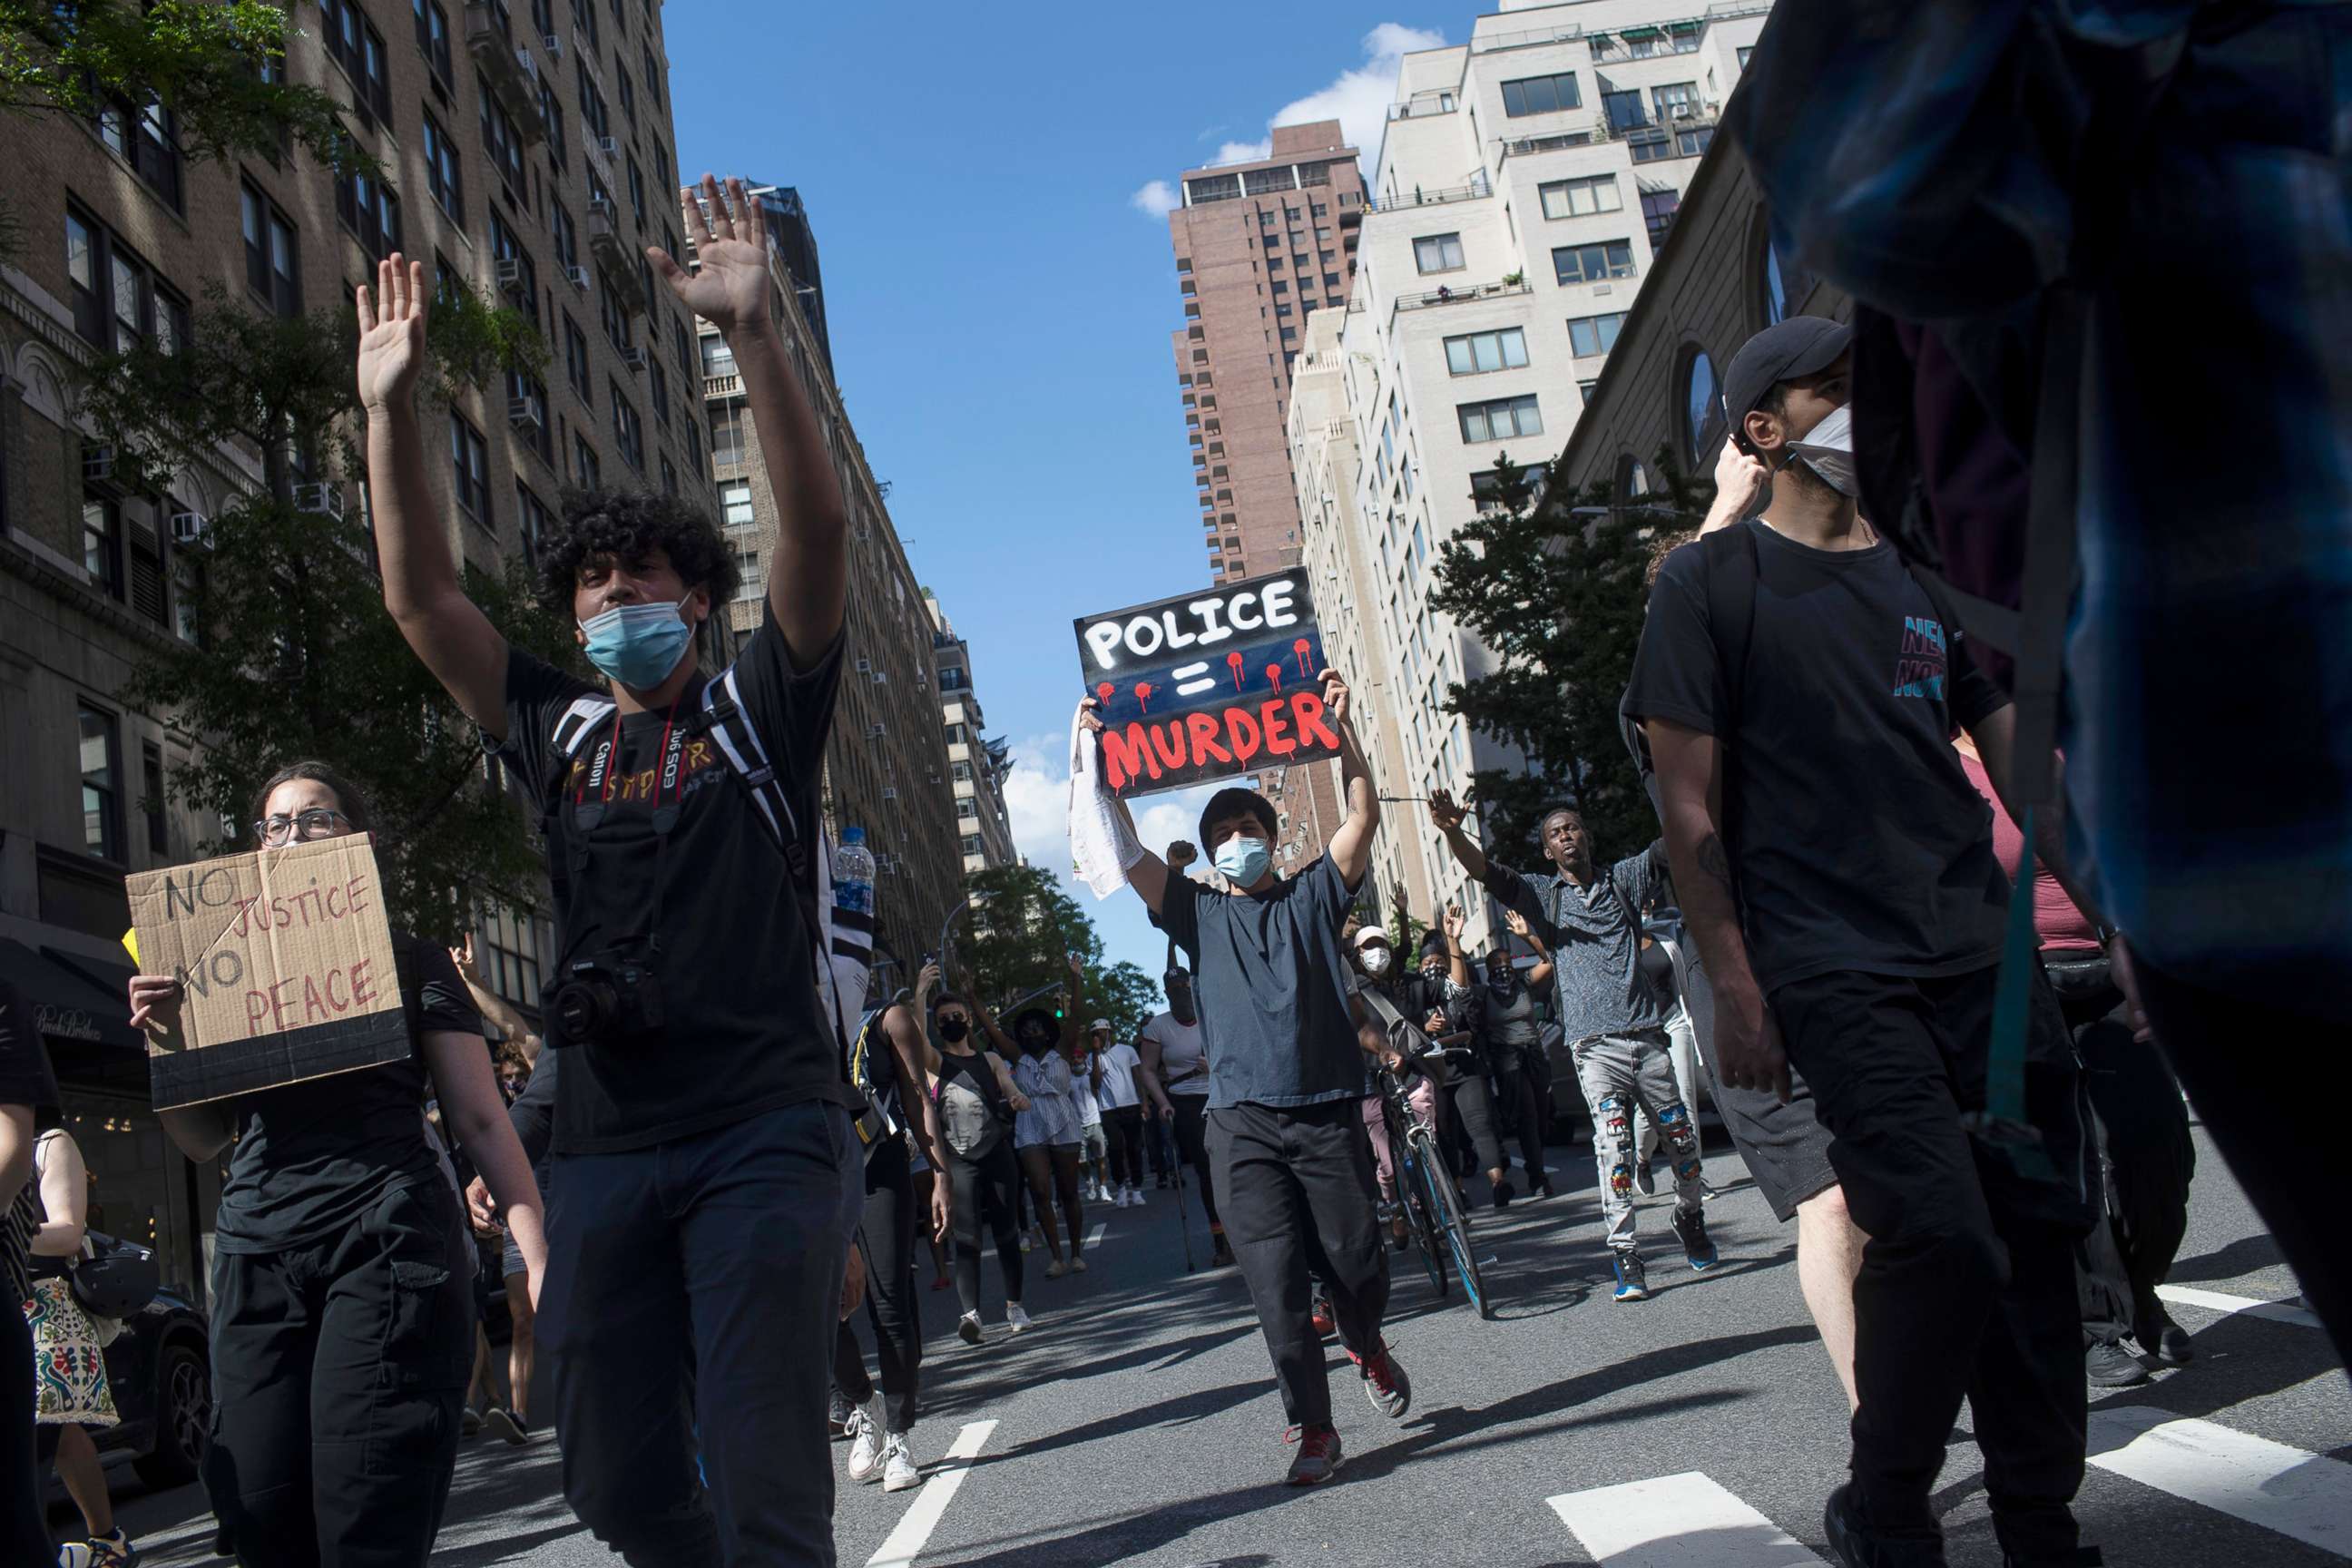 PHOTO: Protesters march during a solidarity rally for George Floyd, May 30, 2020, in New York.